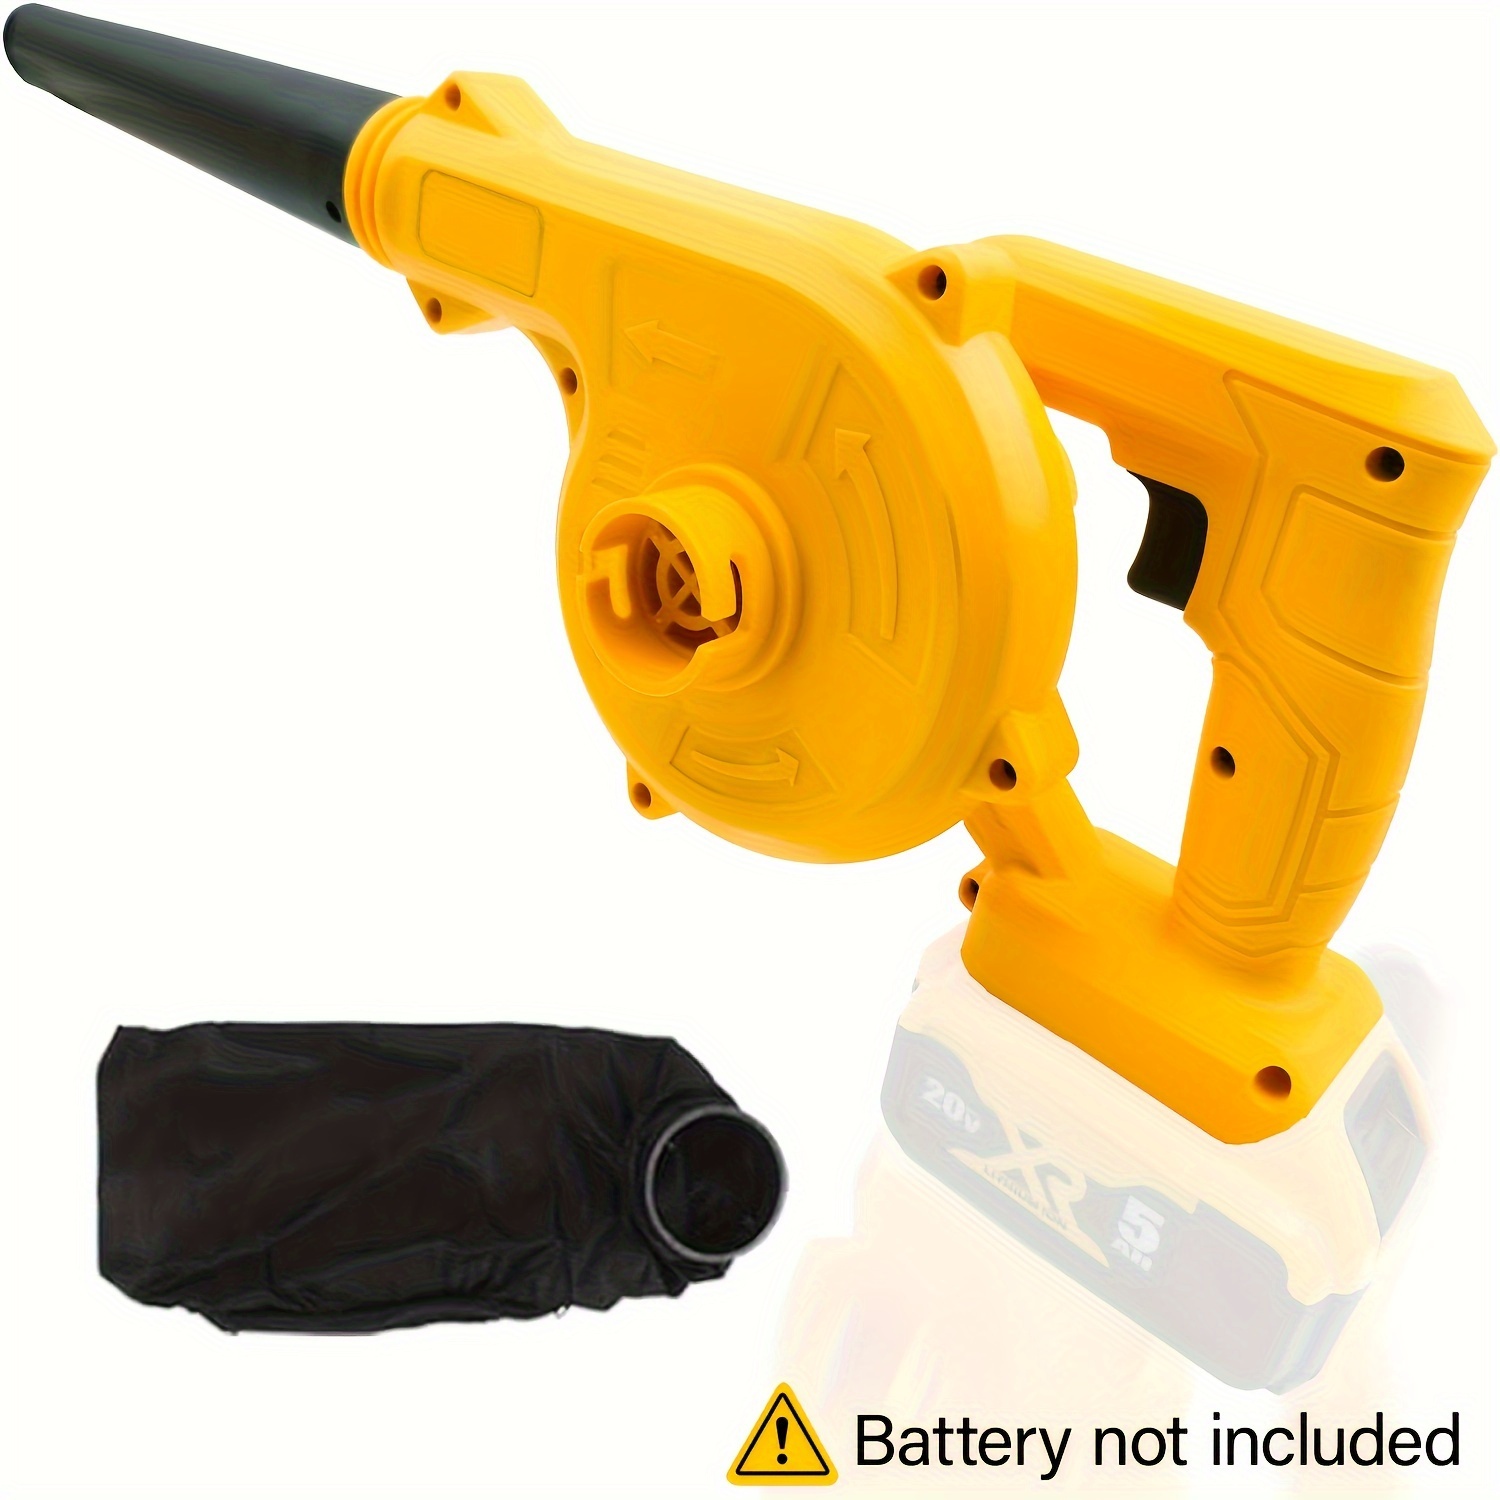 WORKSITE Powerful Leaf Blower Vacuum Cleaner Snow Dust Air Garden Blowers  4.0Ah Battery 20V Portable Handheld Cordless Blower,Lawn & Garden Tools